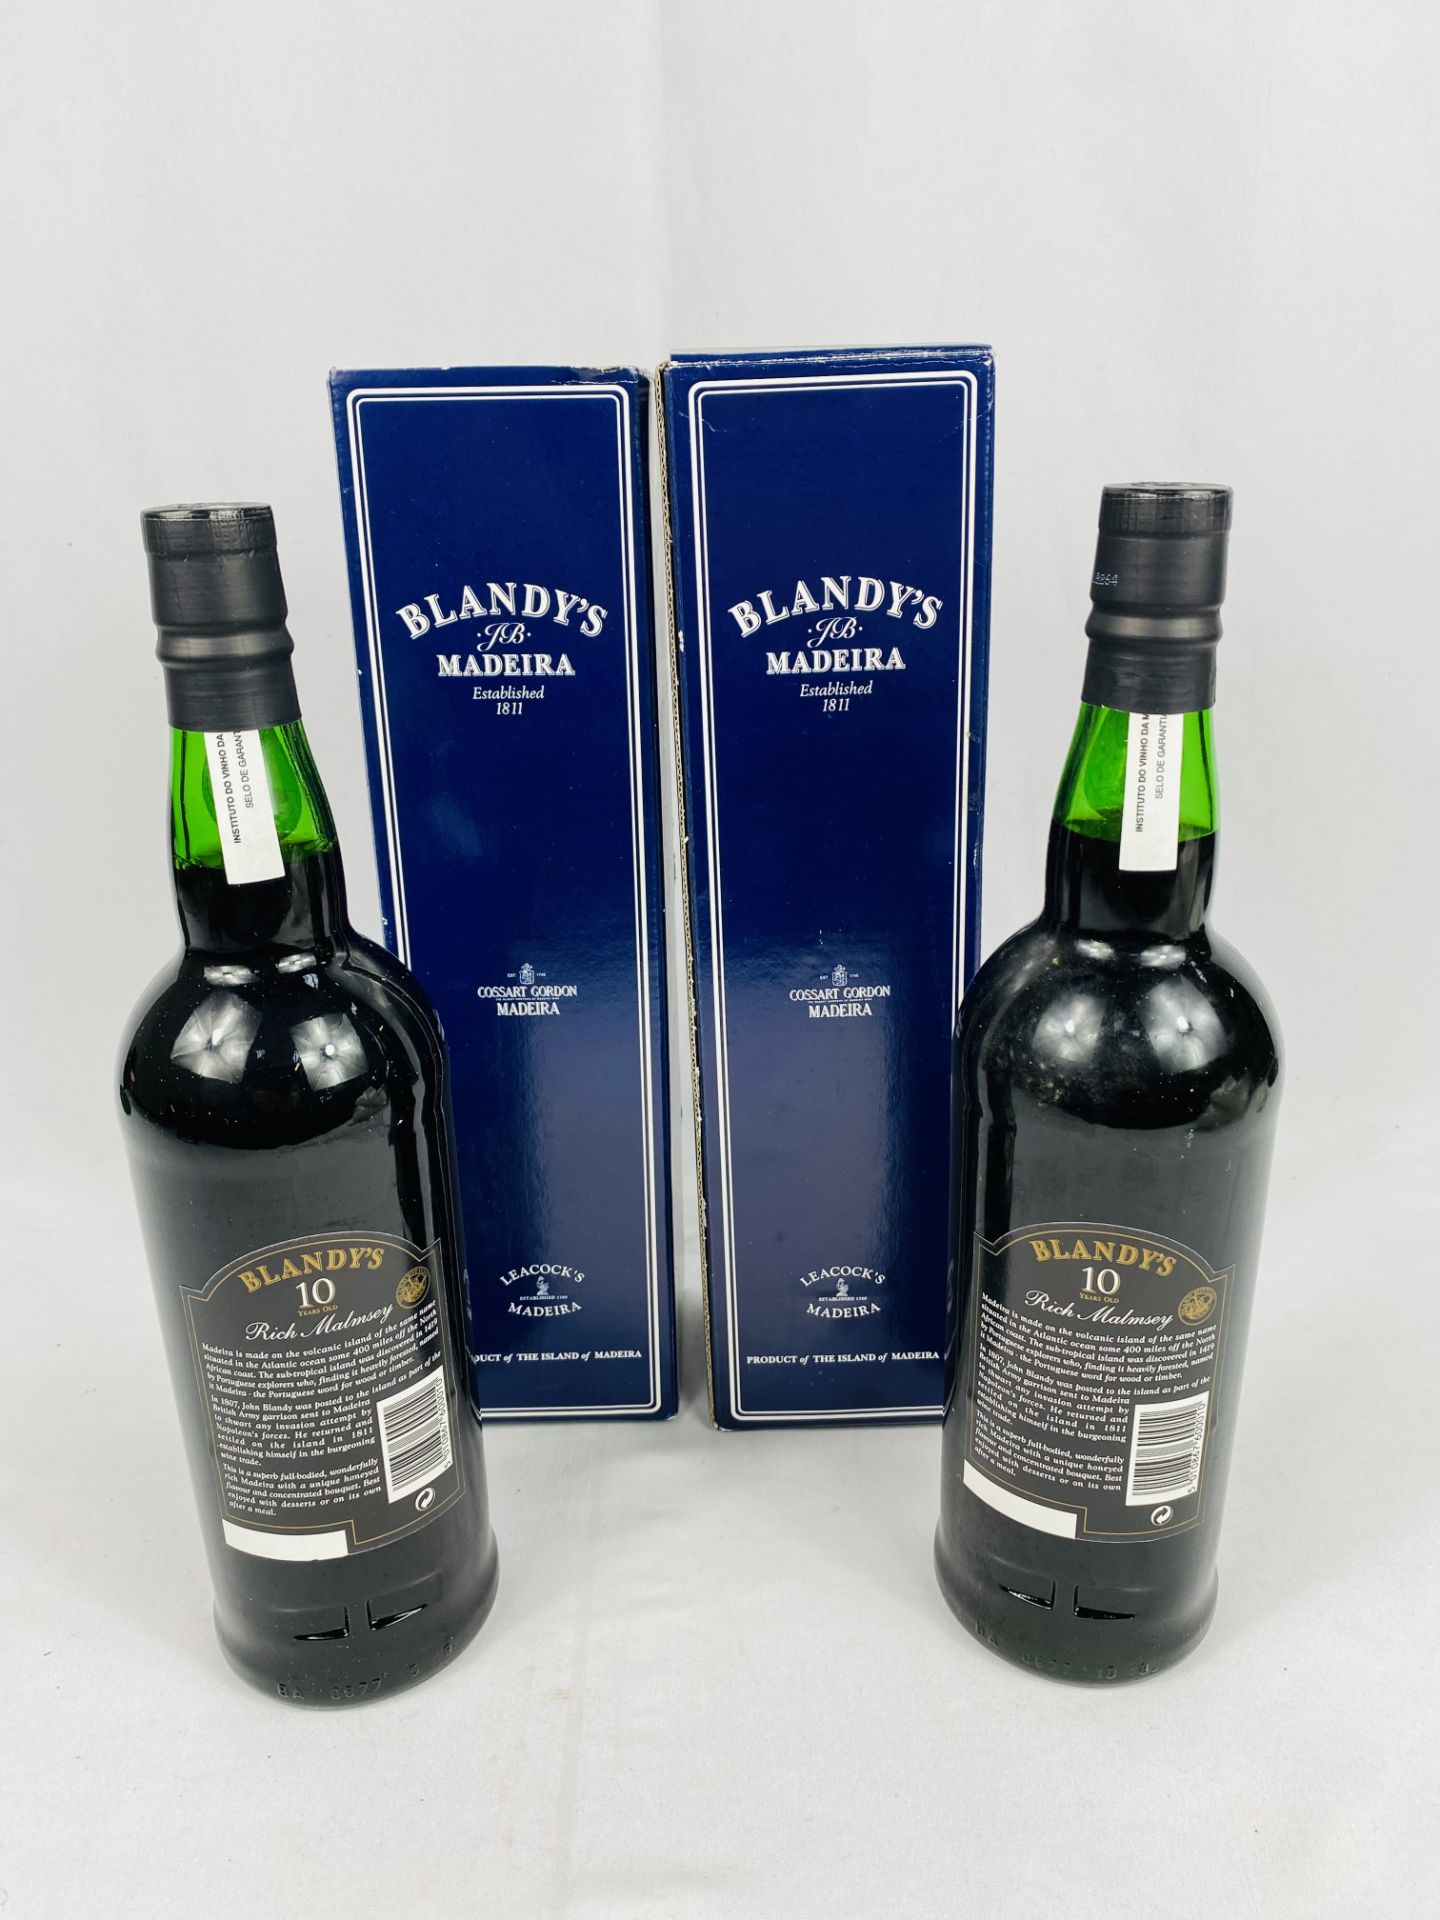 Two 75cl bottles of Blandy's Malmsey Madeira. - Image 2 of 2